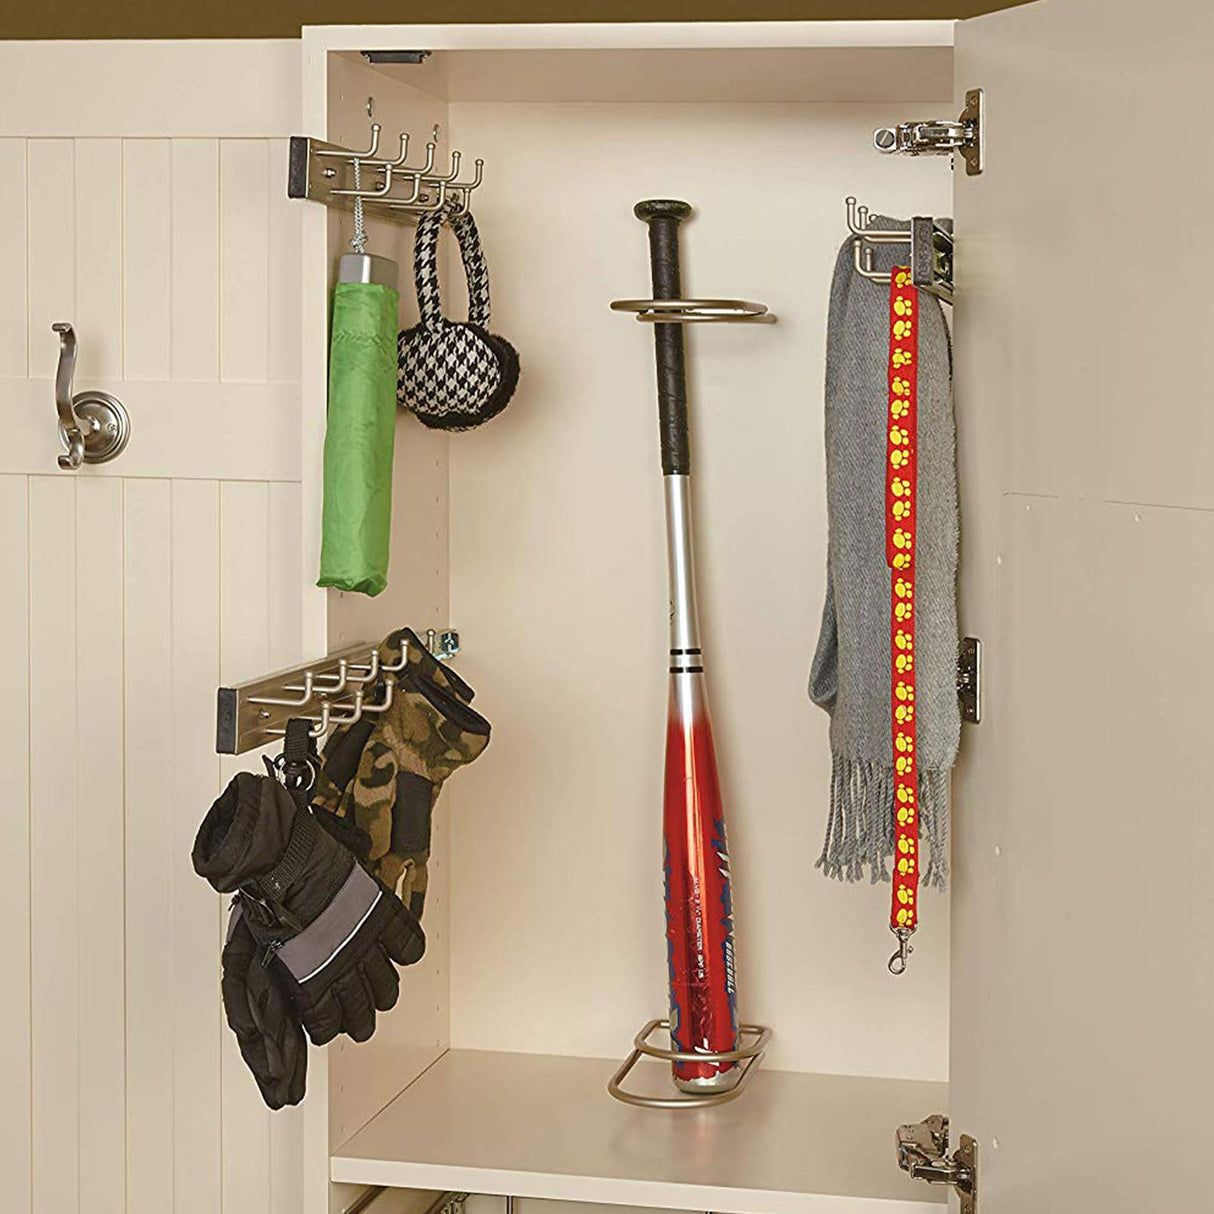 Rev-A-Shelf 14" Pull Out Closet Organization Rack for Belts, Ties and Scarves, Accessories Storage Hanger with Mounting Hardware, Chrome, BRC-14CR